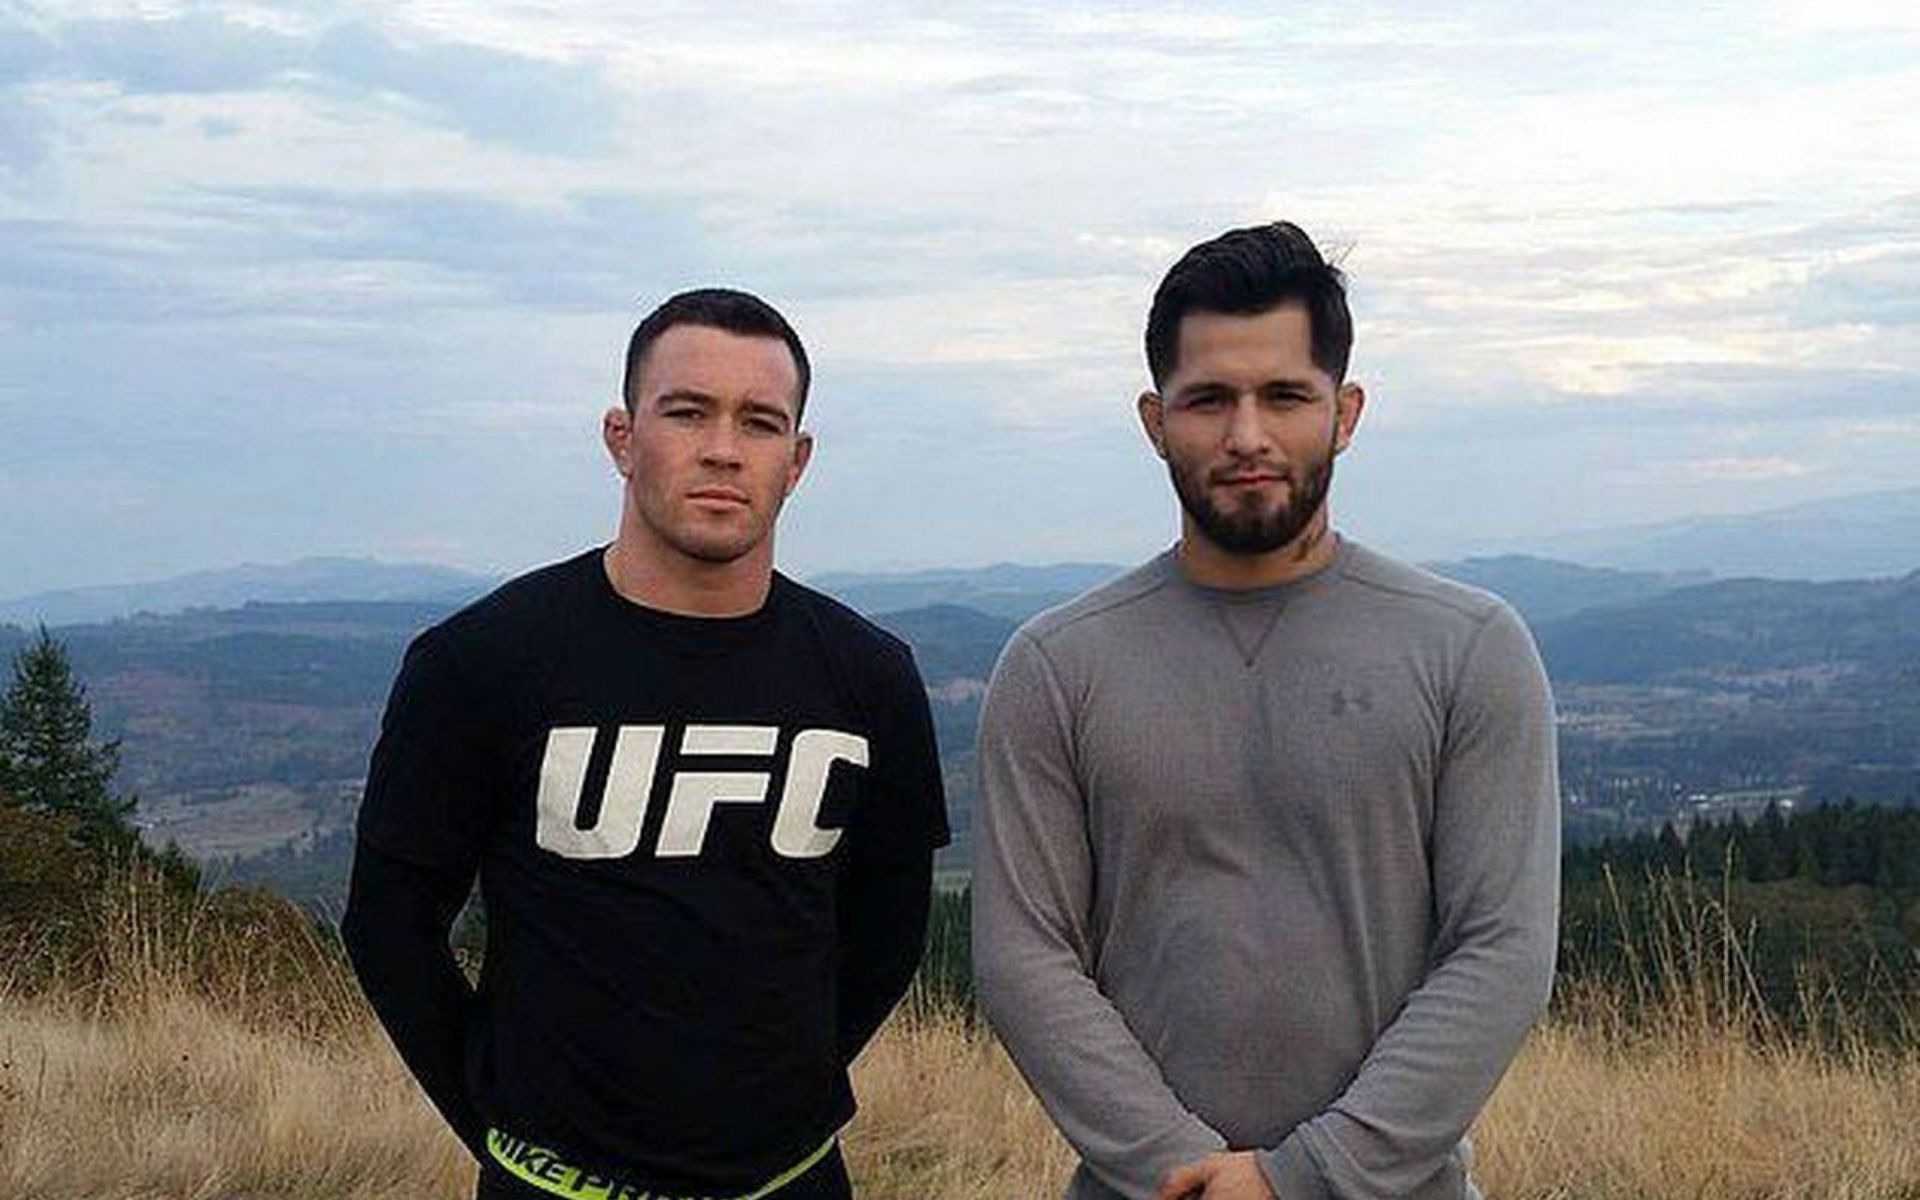 Former teammates Colby Covington and Jorge Masvidal are set to headline UFC 272 against each other in March.